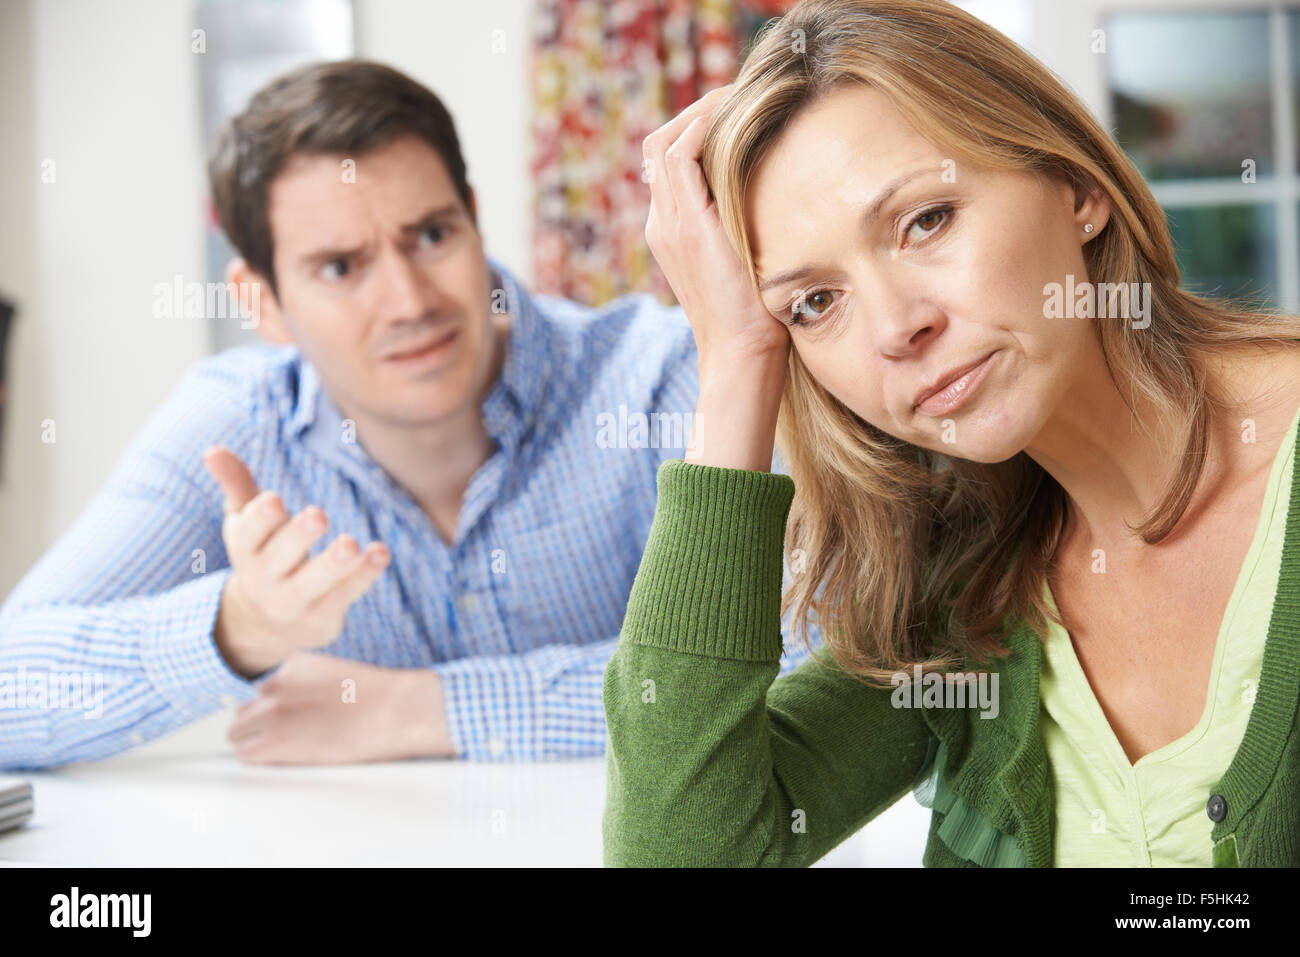 Couple Having Arguement At Home Stock Photo